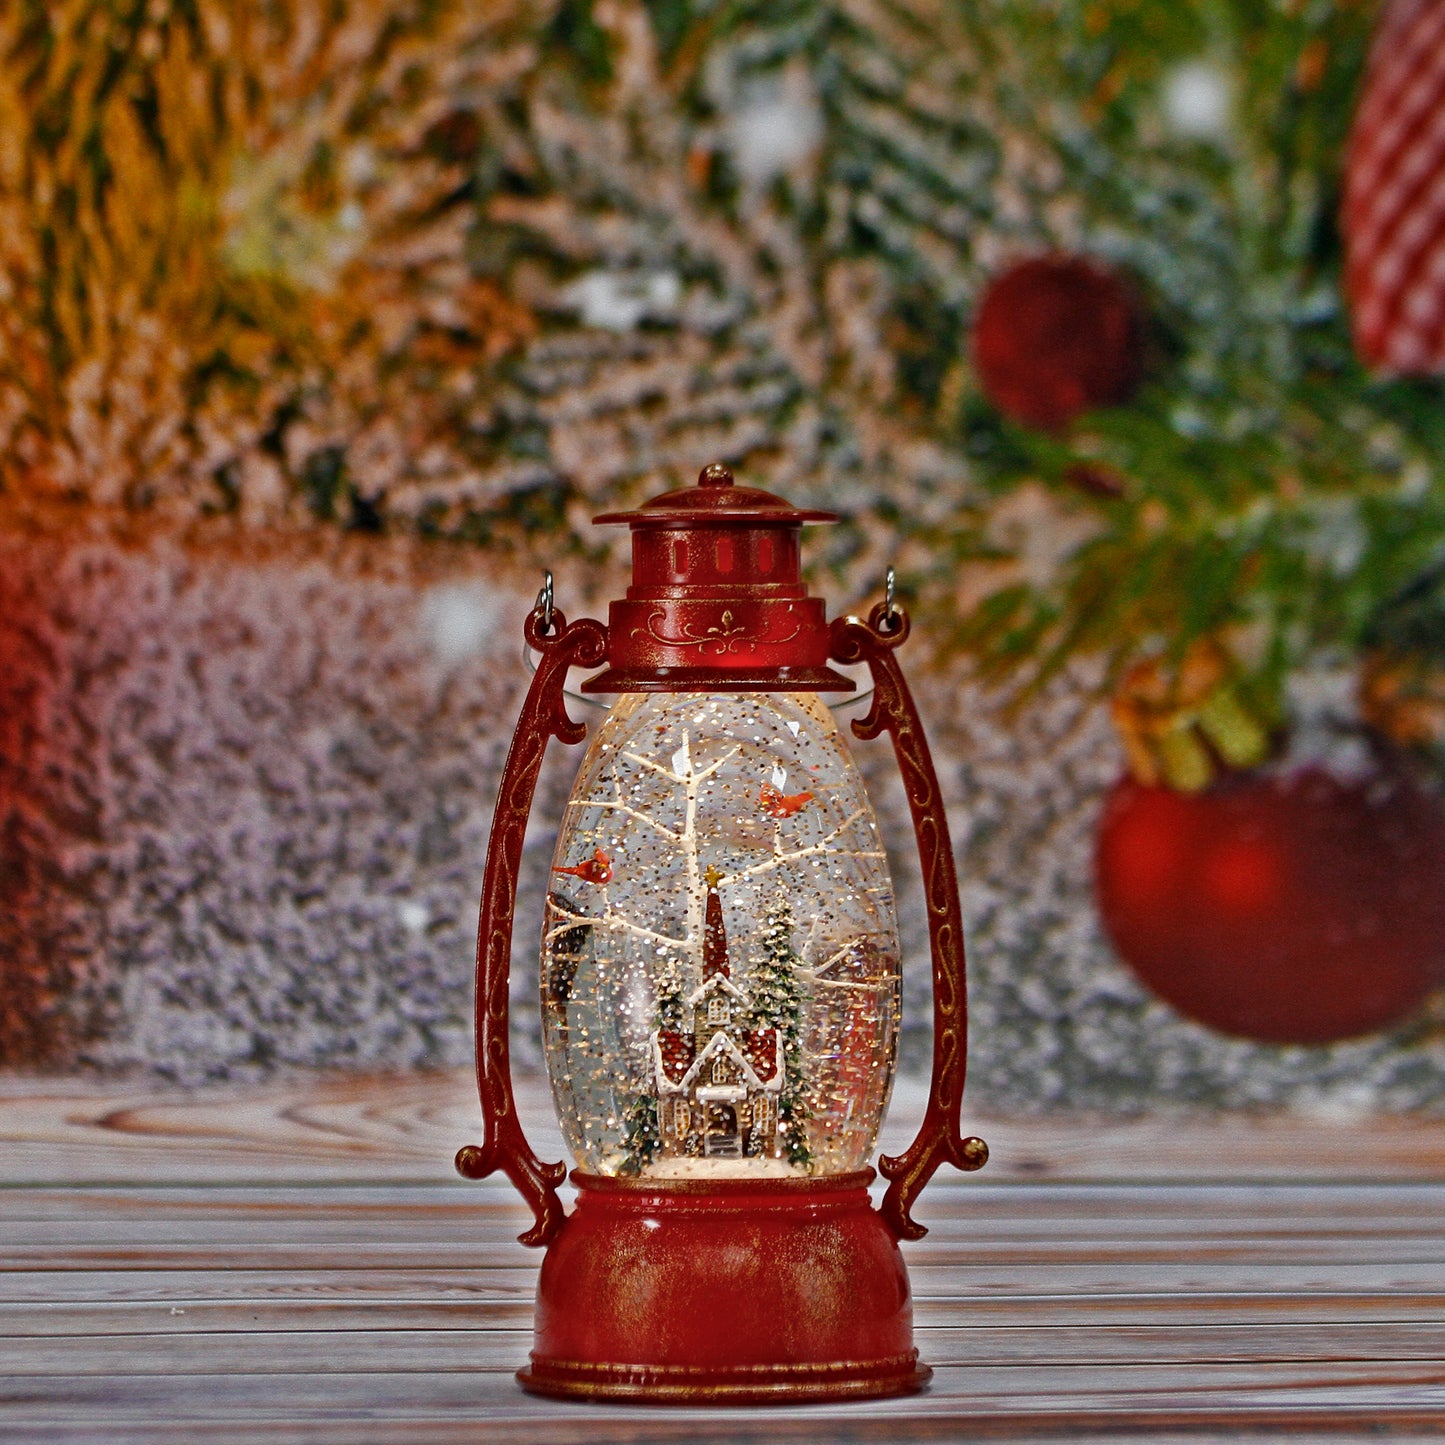 Cardinal Snow Globe,Christmas Festival Snow Globe ,Water Glittering Lantern Swirling，9.4 inch Gifts Festival Ornament Musical red Cardinal/Church,Trees and House, Battery or USB Powered